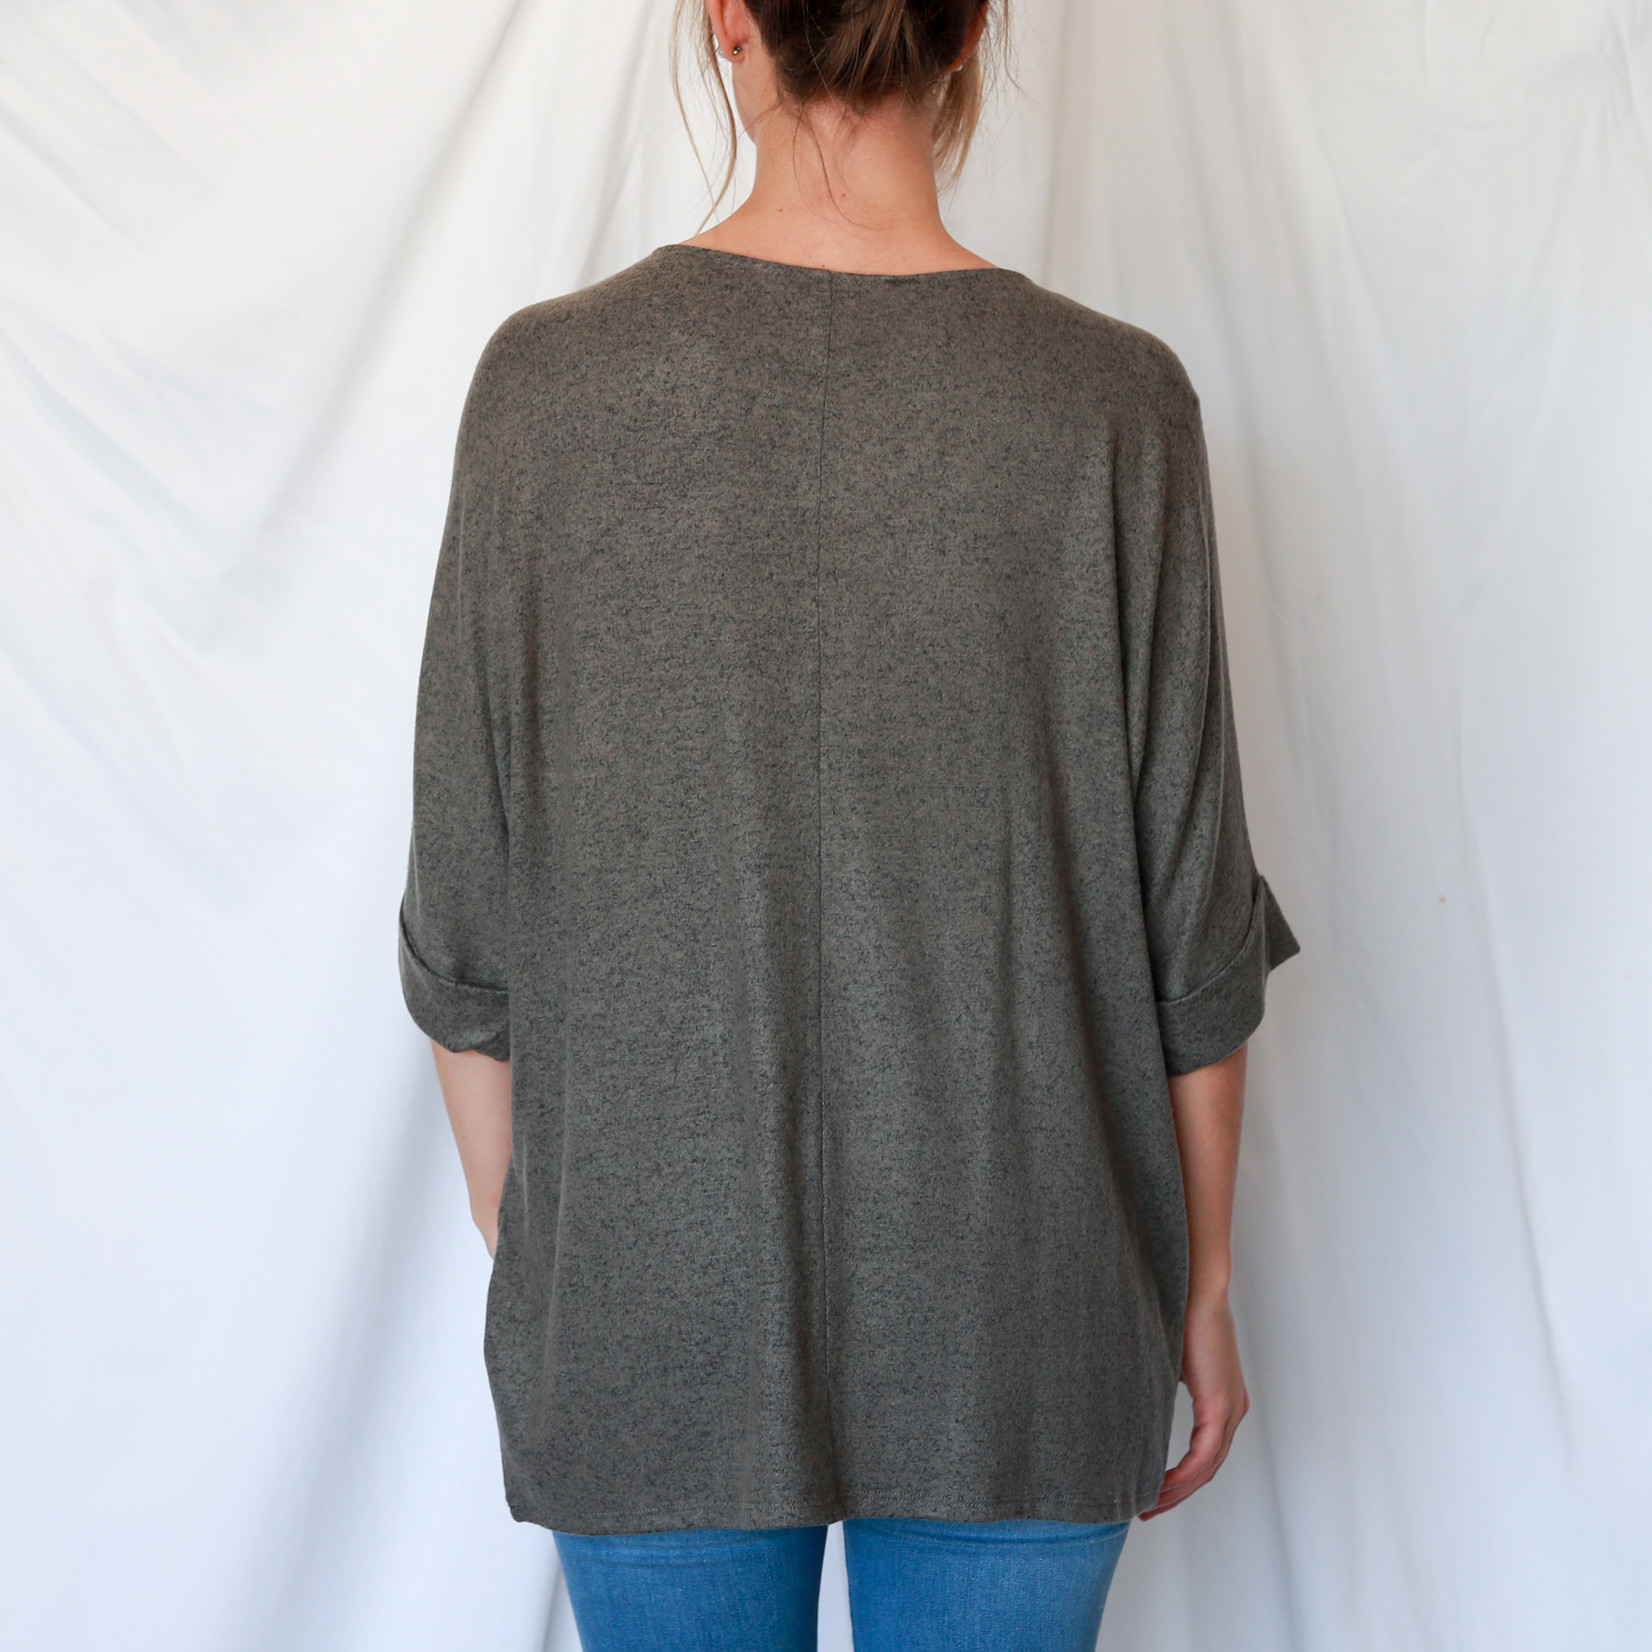 Apricot soft batwing top